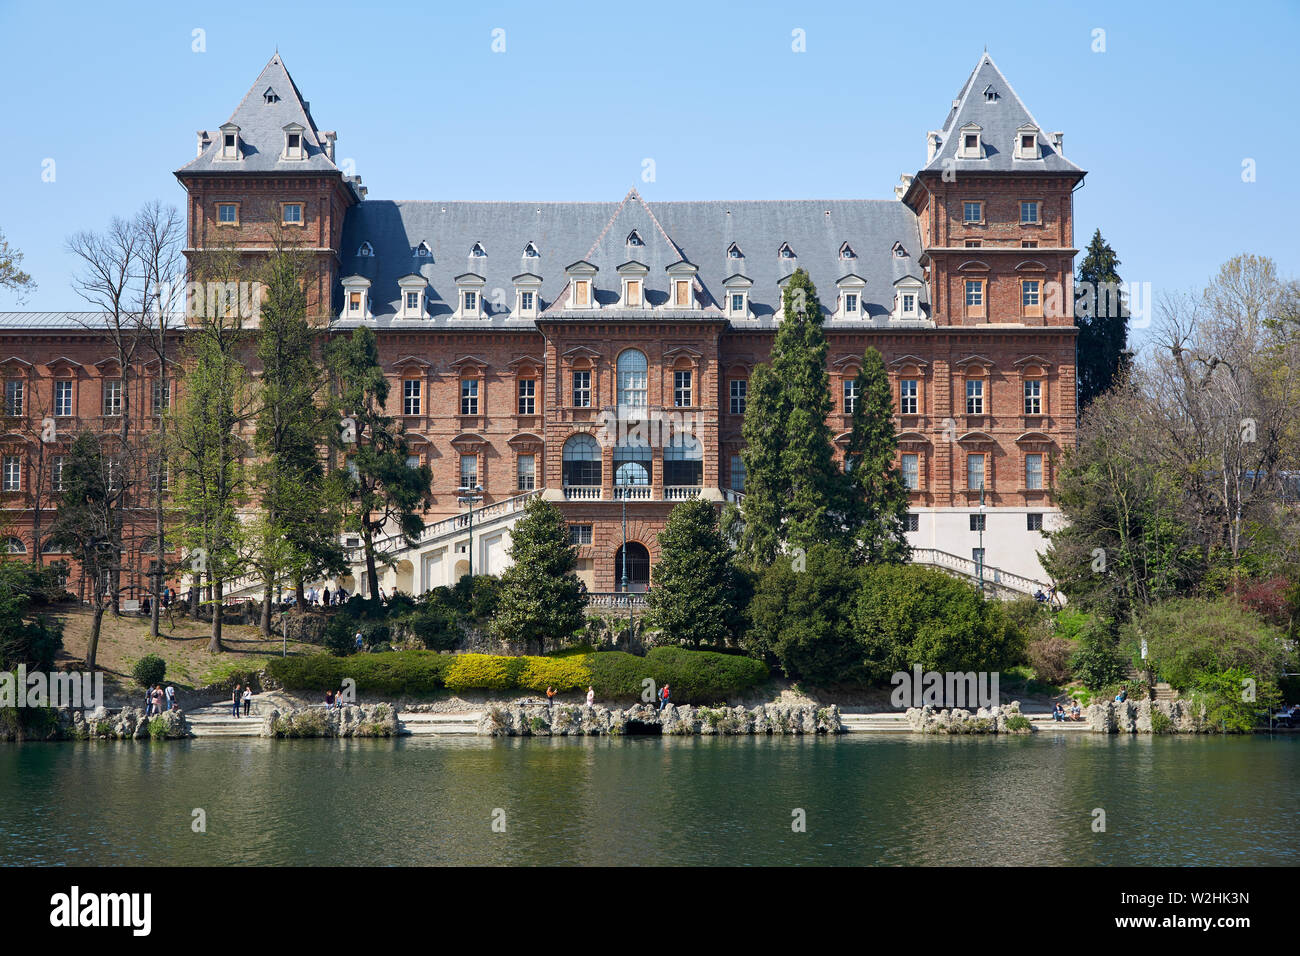 TURIN, ITALY - MARCH 31, 2019: Valentino castle red bricks facade and Po river, clear blue sky in Piedmont, Turin, Italy. Stock Photo